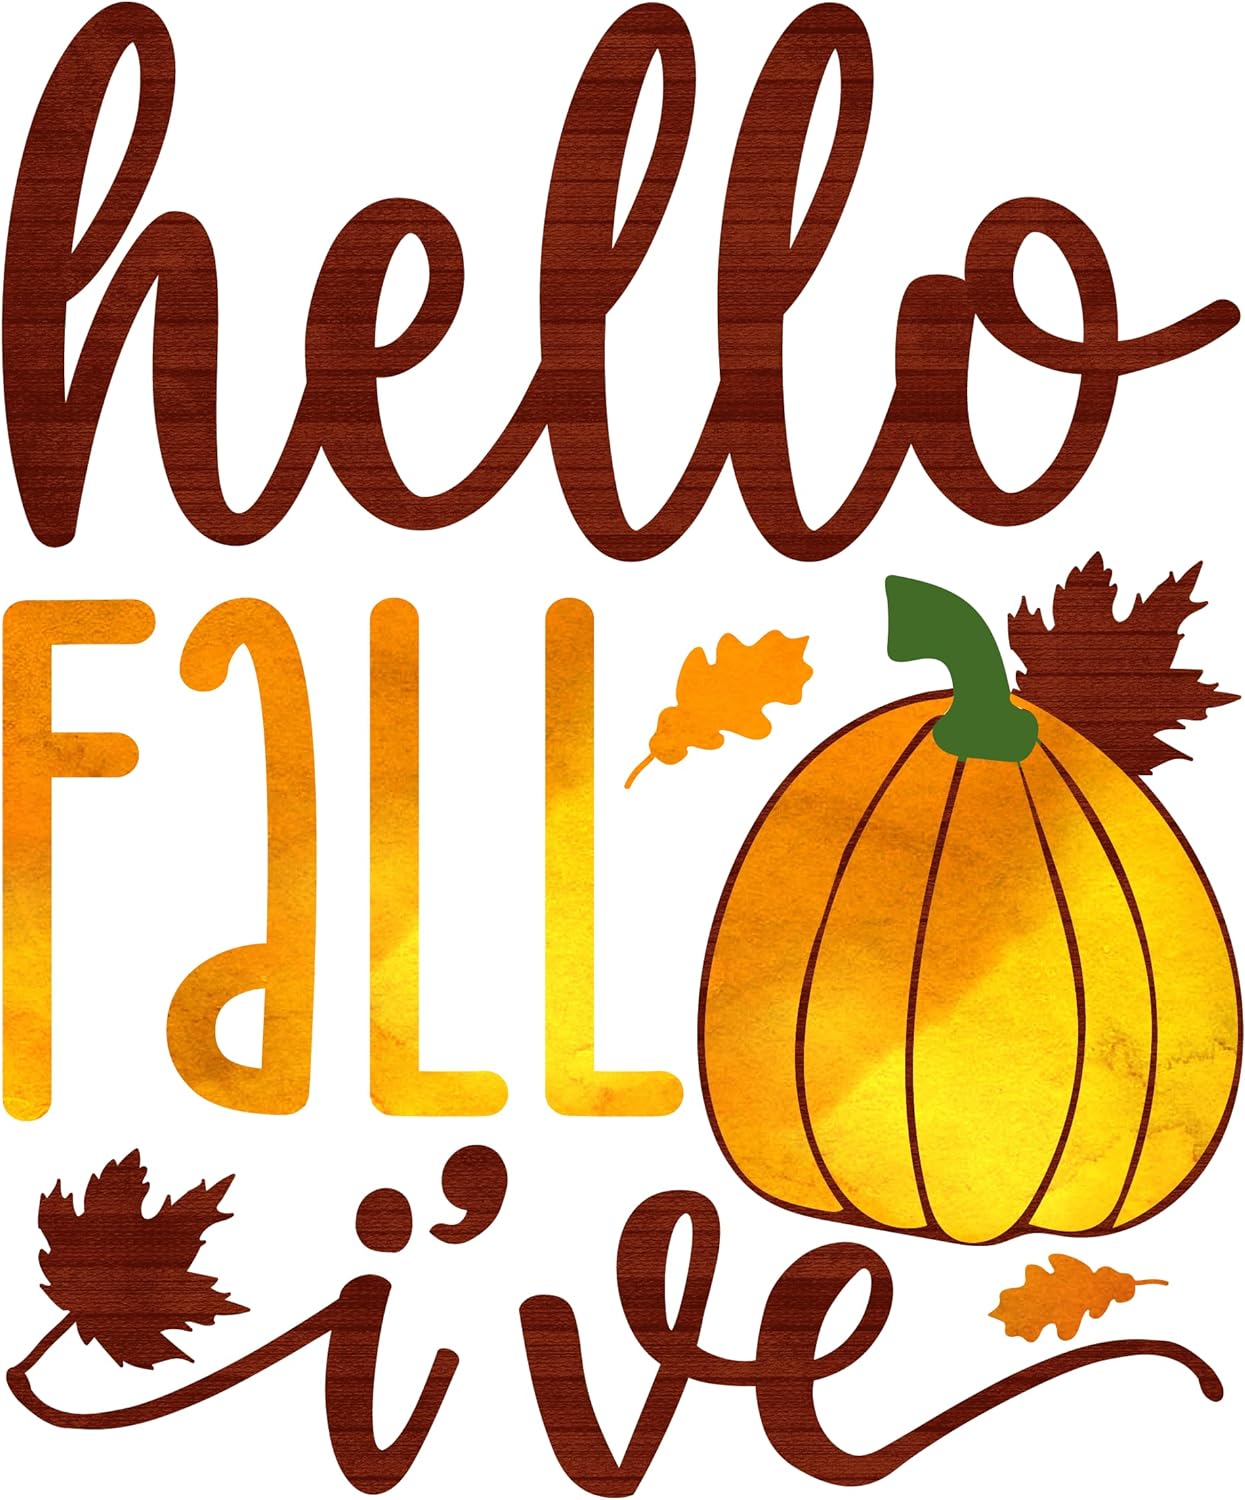 Inspirational Quote Hello Fall I've Motivational Sticker Vinyl Decal Motivation Stickers- 5" Vinyl Sticker Waterproof